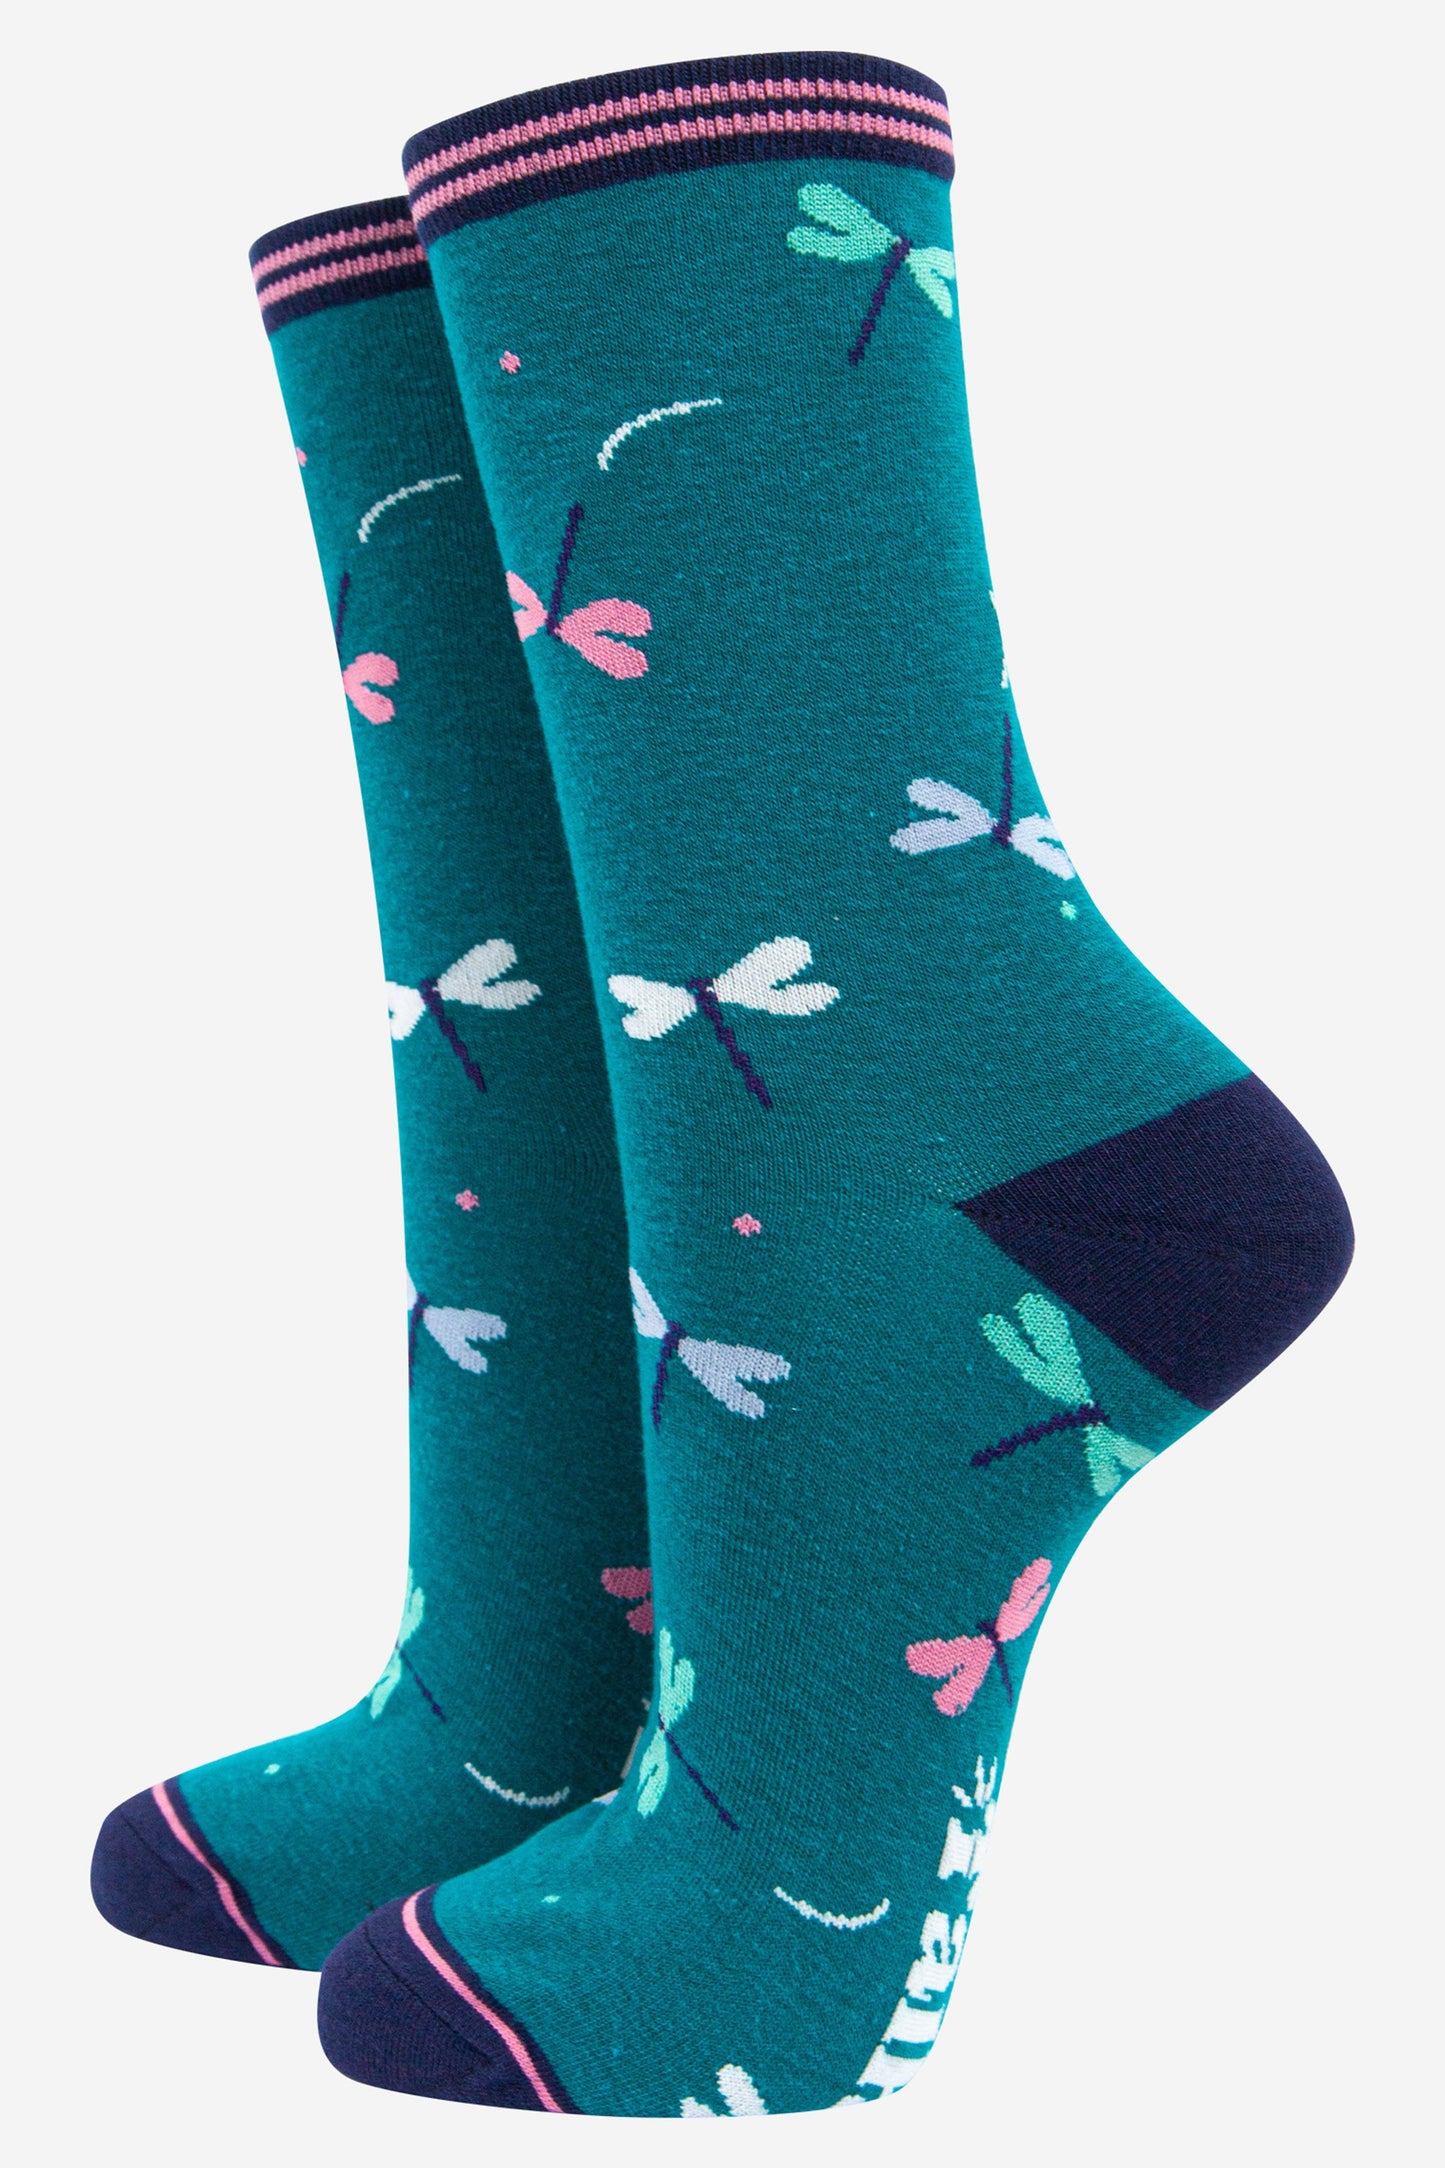 blue ankle socks featuring an all over pattern of pink, blue and white dragonflies